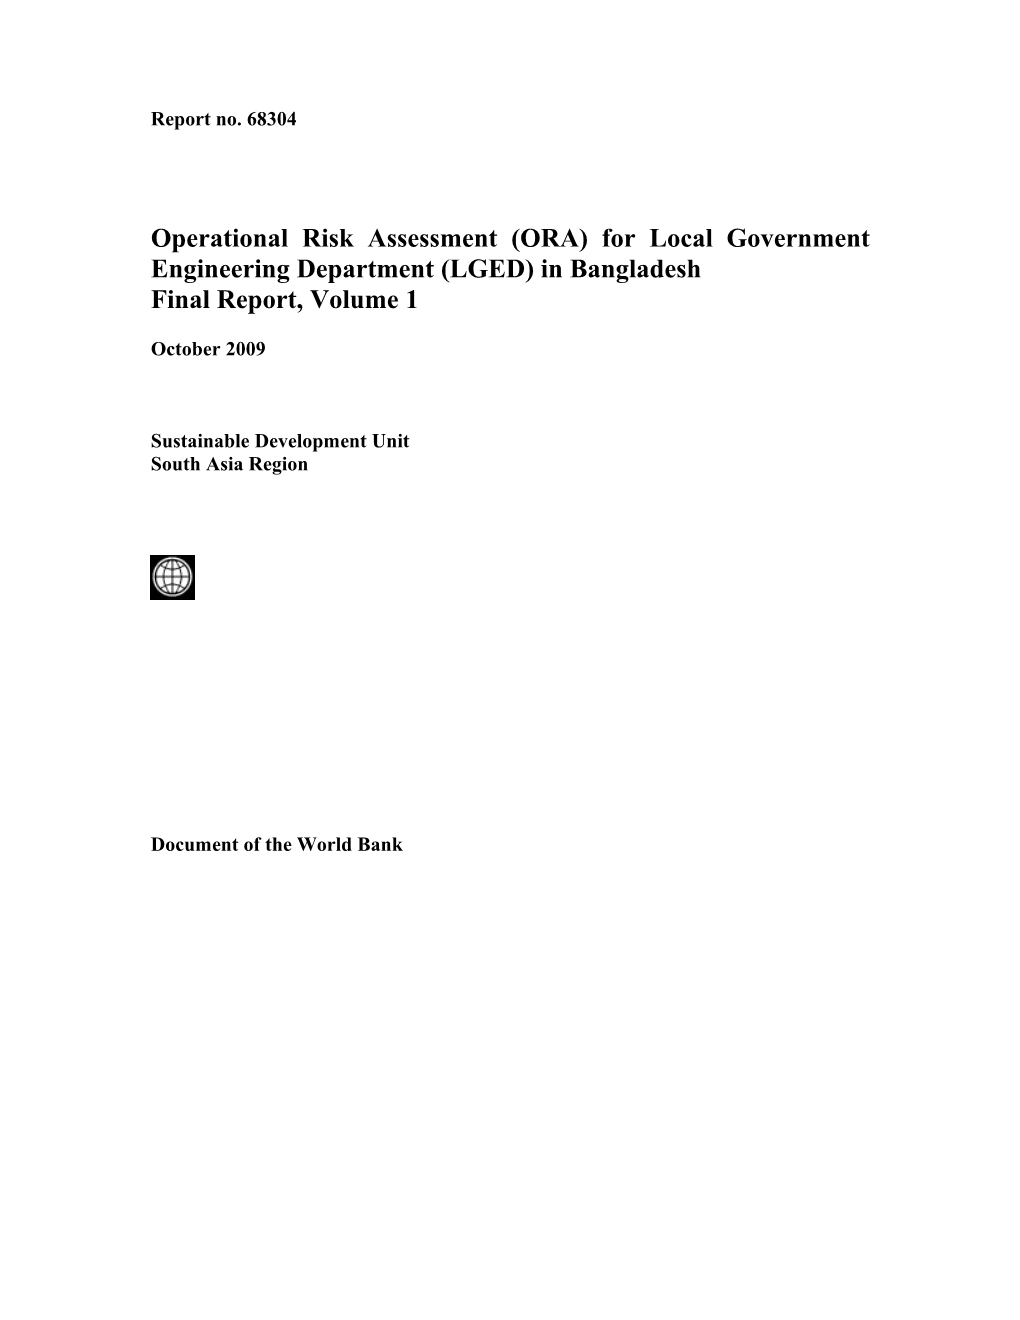 Operational Risk Assessment of Roads and Highways Investment